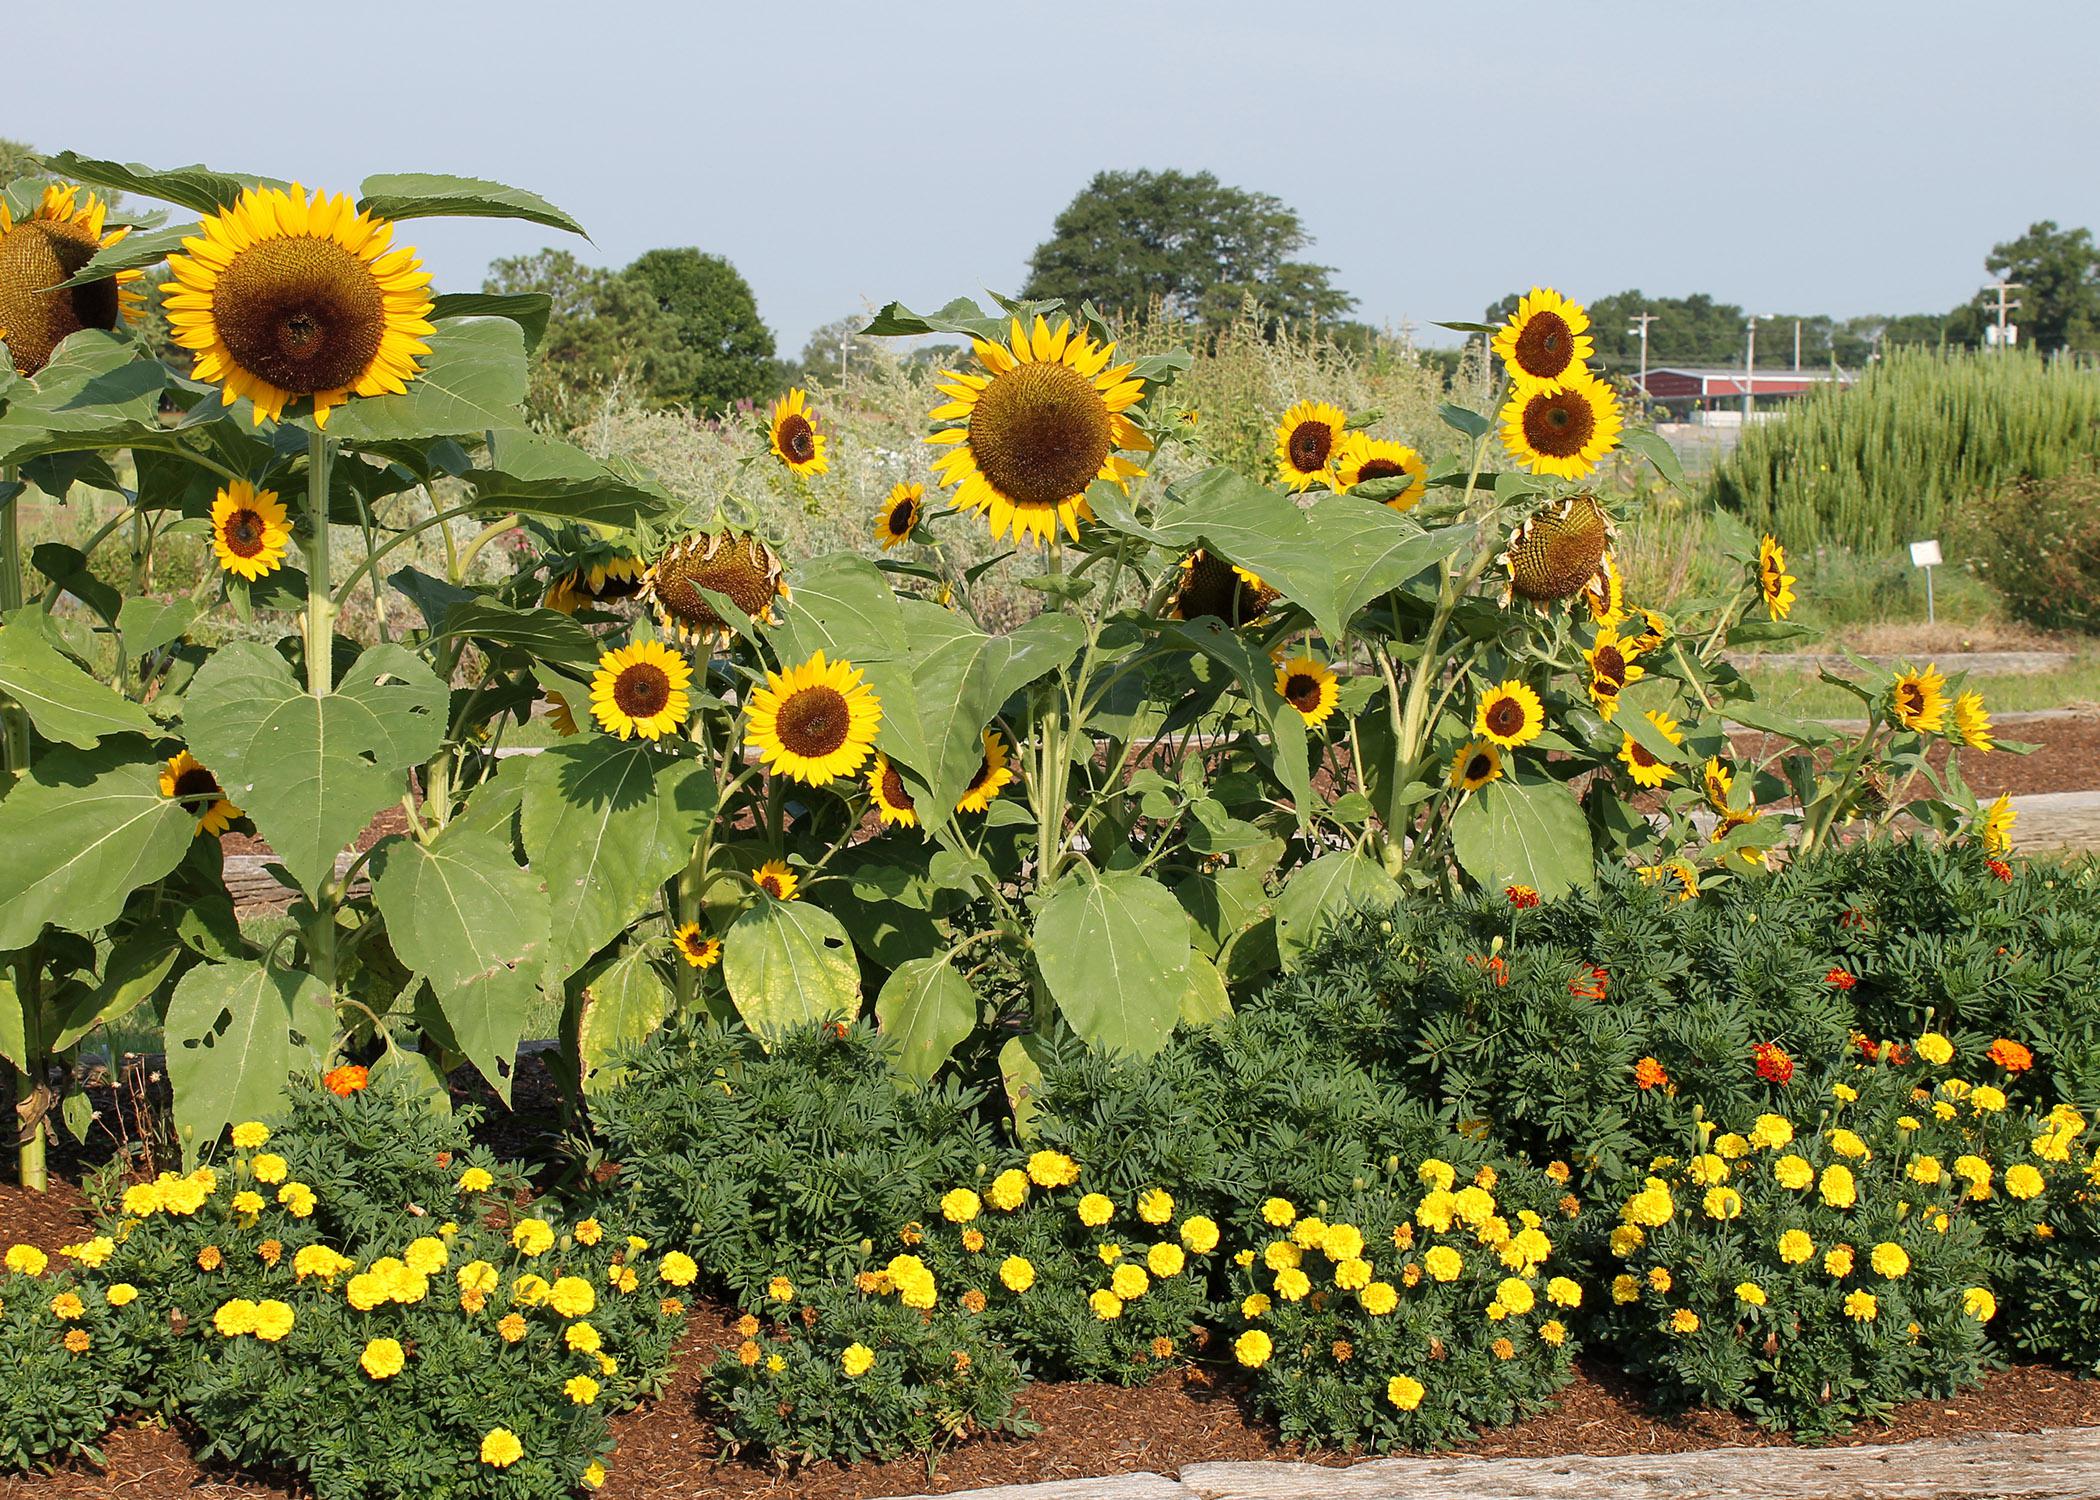 Mississippi State University horticulture experts will lead educational seminars, answer gardening questions, and offer walking and wagon tours of the gardens at the annual fall flower and vegetable tour at the North Mississippi Research and Extension Center in Verona on Sept. 20, 2014. (File Photo)